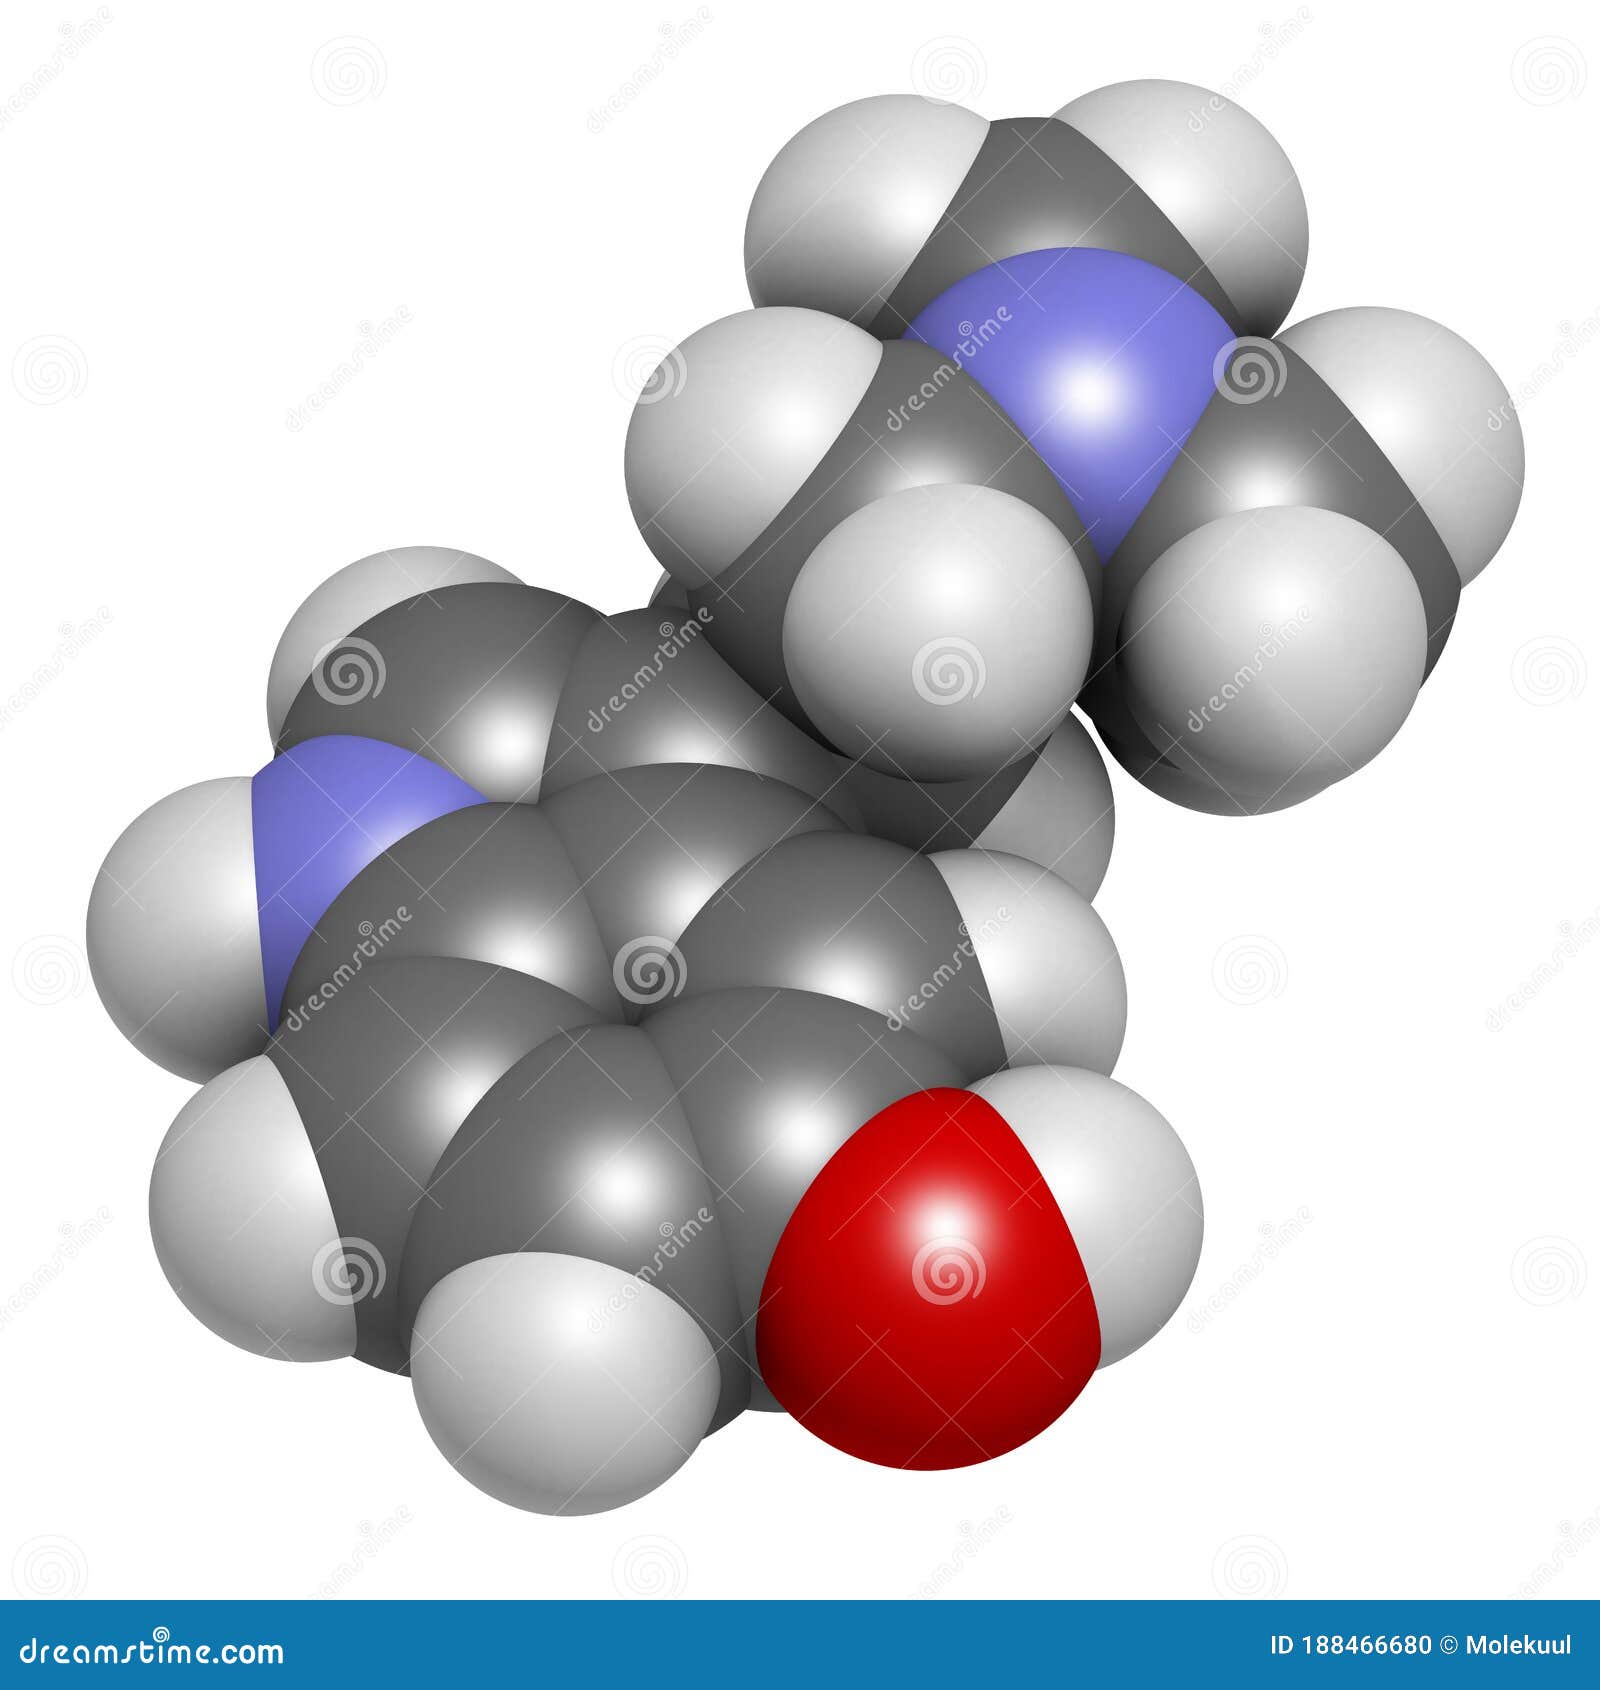 bufotenin molecule. tryptamine present in several psychedelic toads. 3d rendering. atoms are represented as spheres with